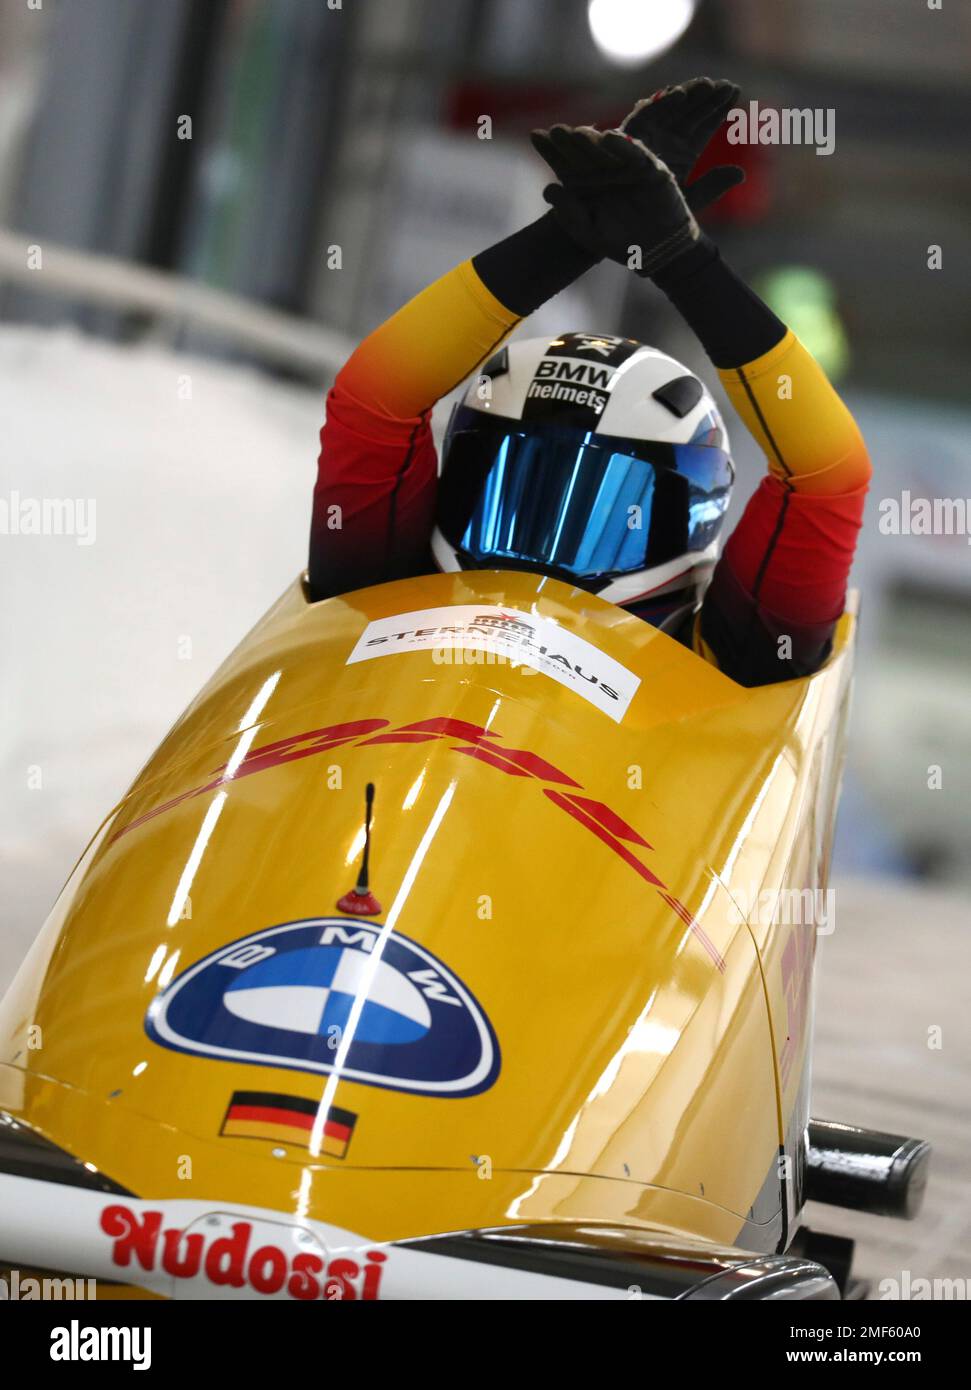 Germanys bobsleigh pilot Stephanie Schneider at the start of the womens monobob race at the Bobsleigh and Skeleton World Championships in Altenberg, Germany, Saturday, Feb.13, 2021